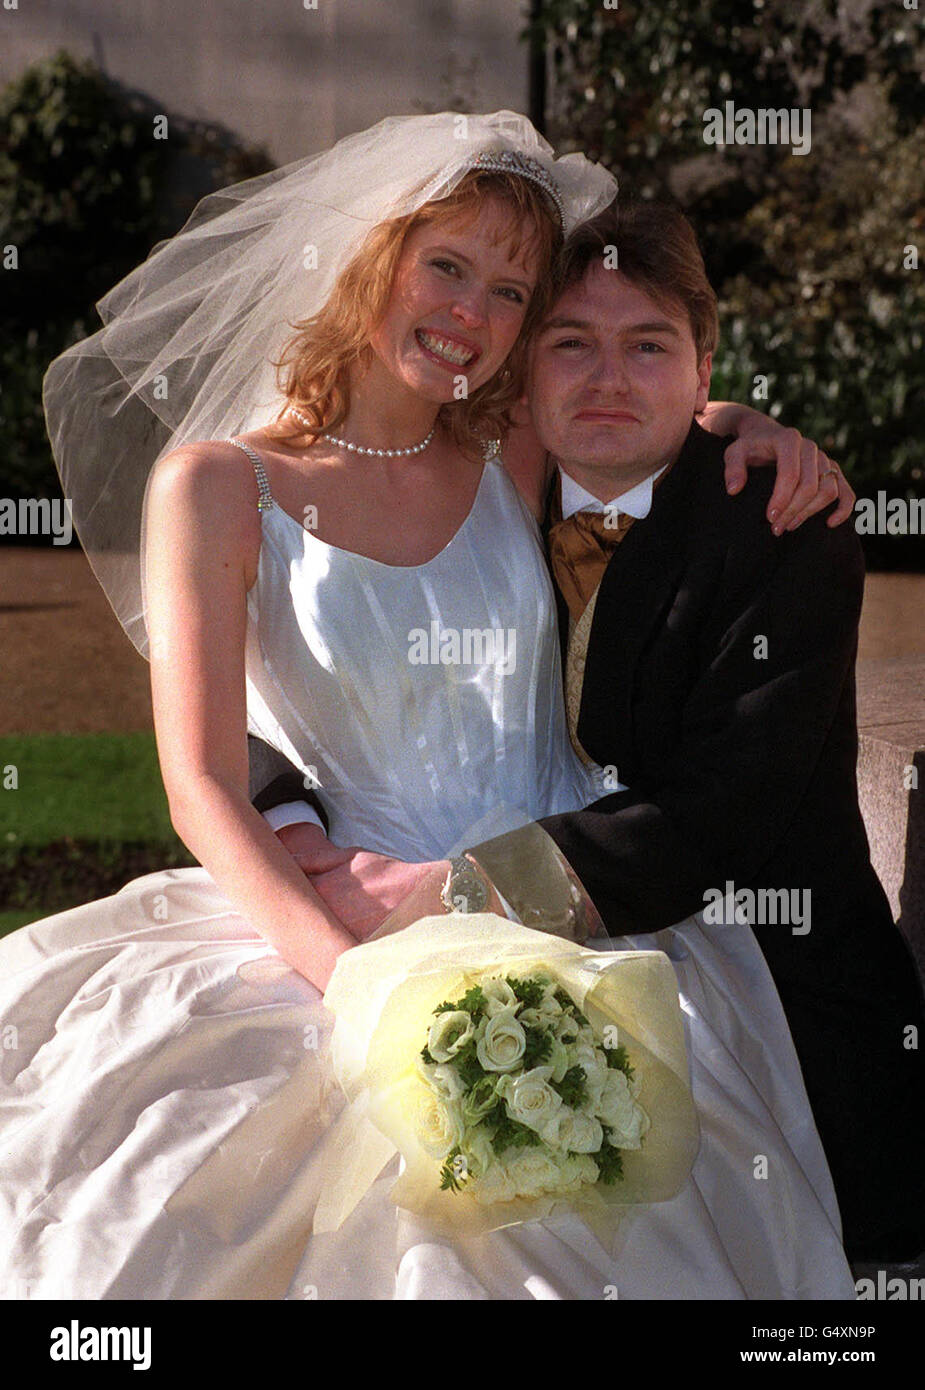 Jonathan Brignall, 30 and his bride Joanne Phair, also 30 who are the winners of Wedding and Home Magazine's Bride of the Year 2000 competition. Joanne supported Jonathan through his paralysing disease, Guillain-Barr syndrome. * Jonathan actually proposed to her using sign language from the intensive care unit. Jonathan, who was in the same class as Joanne at infant school, is now making a good recovery. Stock Photo